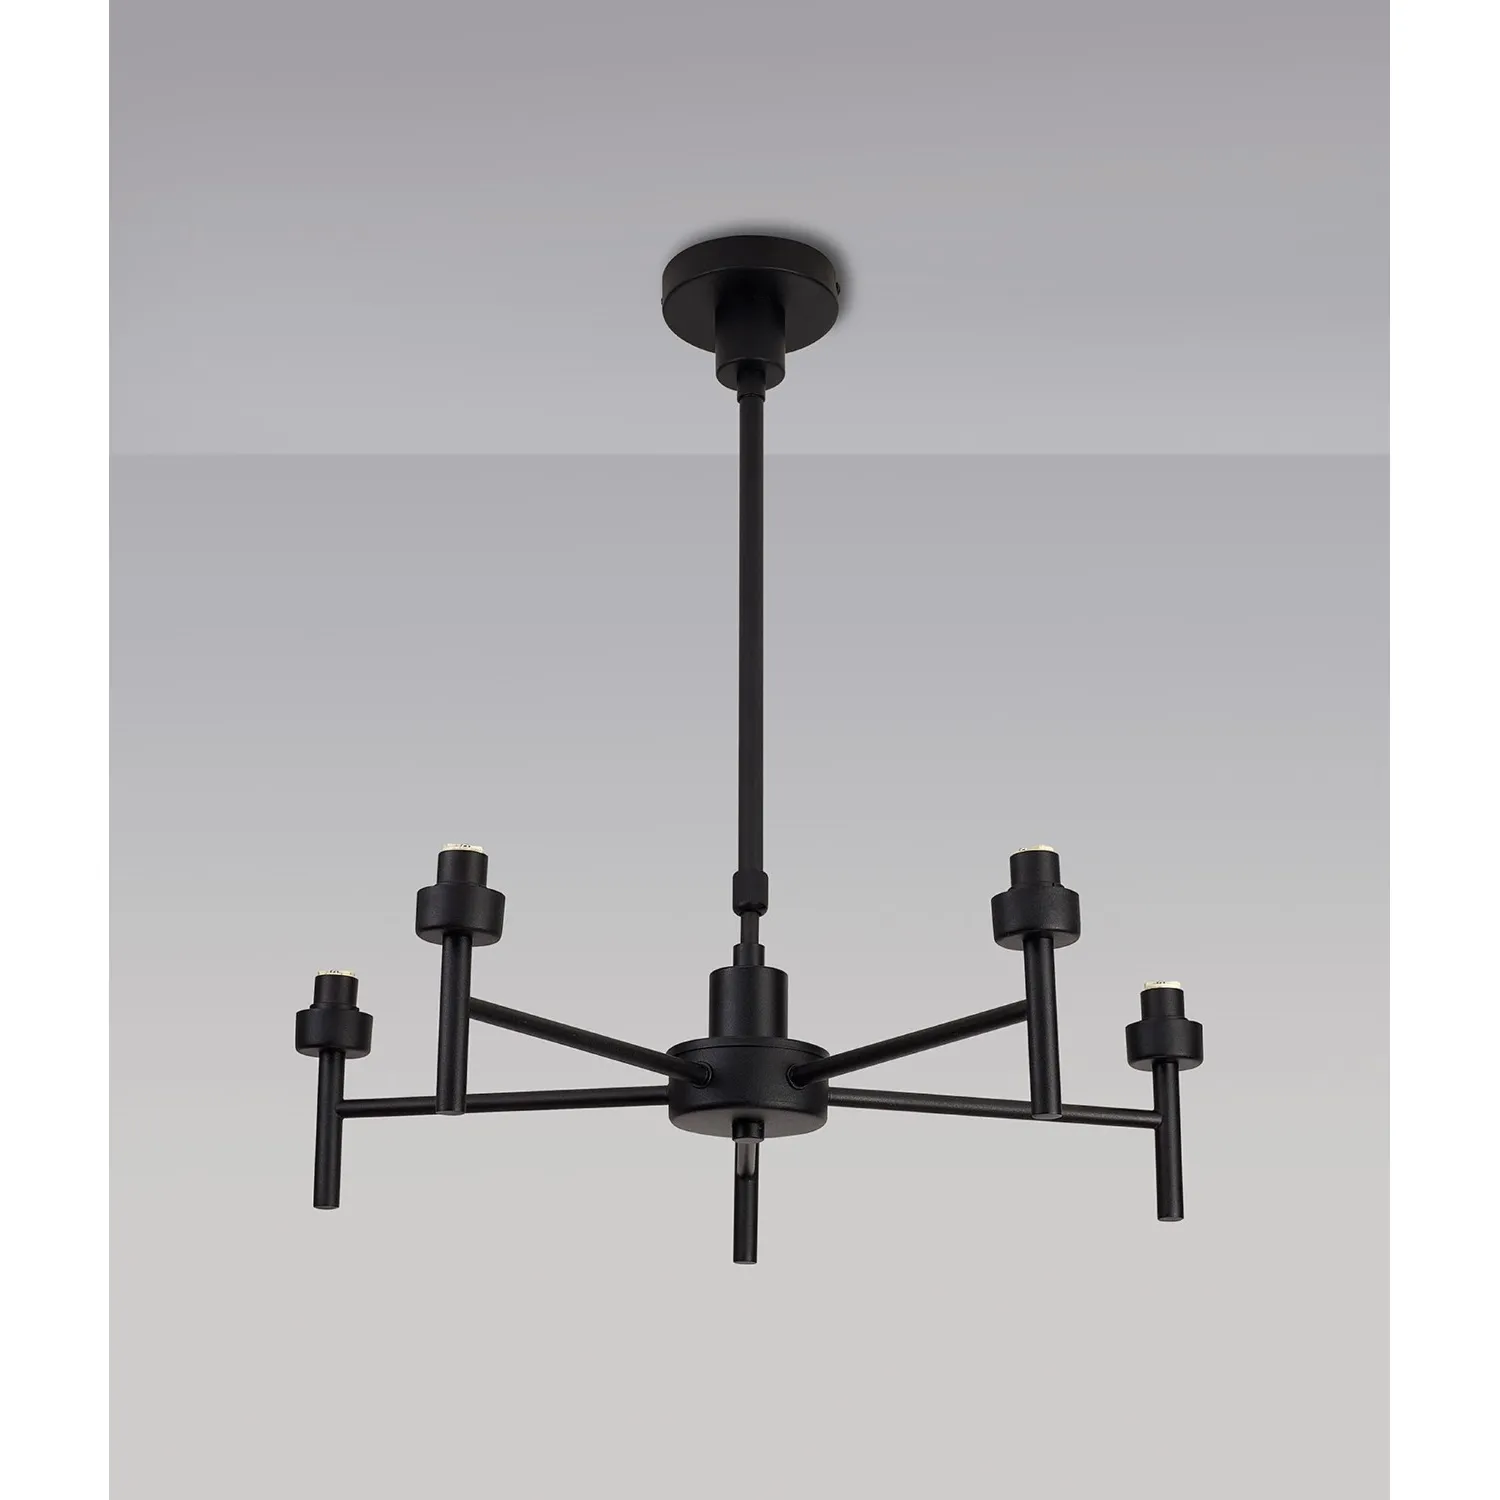 Abingdon Satin Black 5 Light G9 Universal Telescopic Light, Suitable For A Vast Selection Of Glass Shades